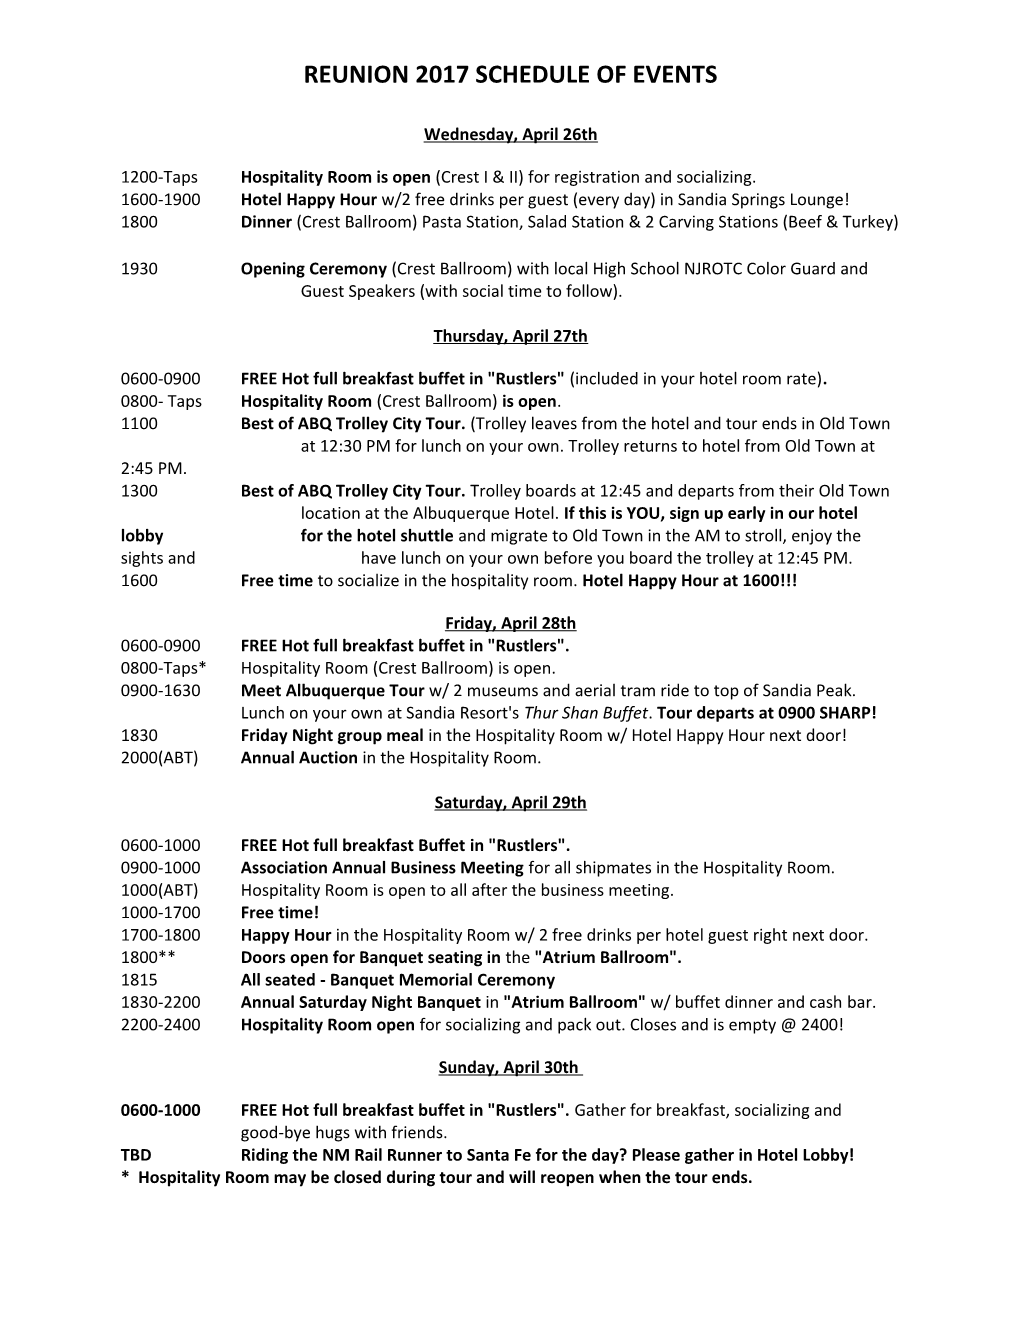 Reunion 2017 Schedule of Events